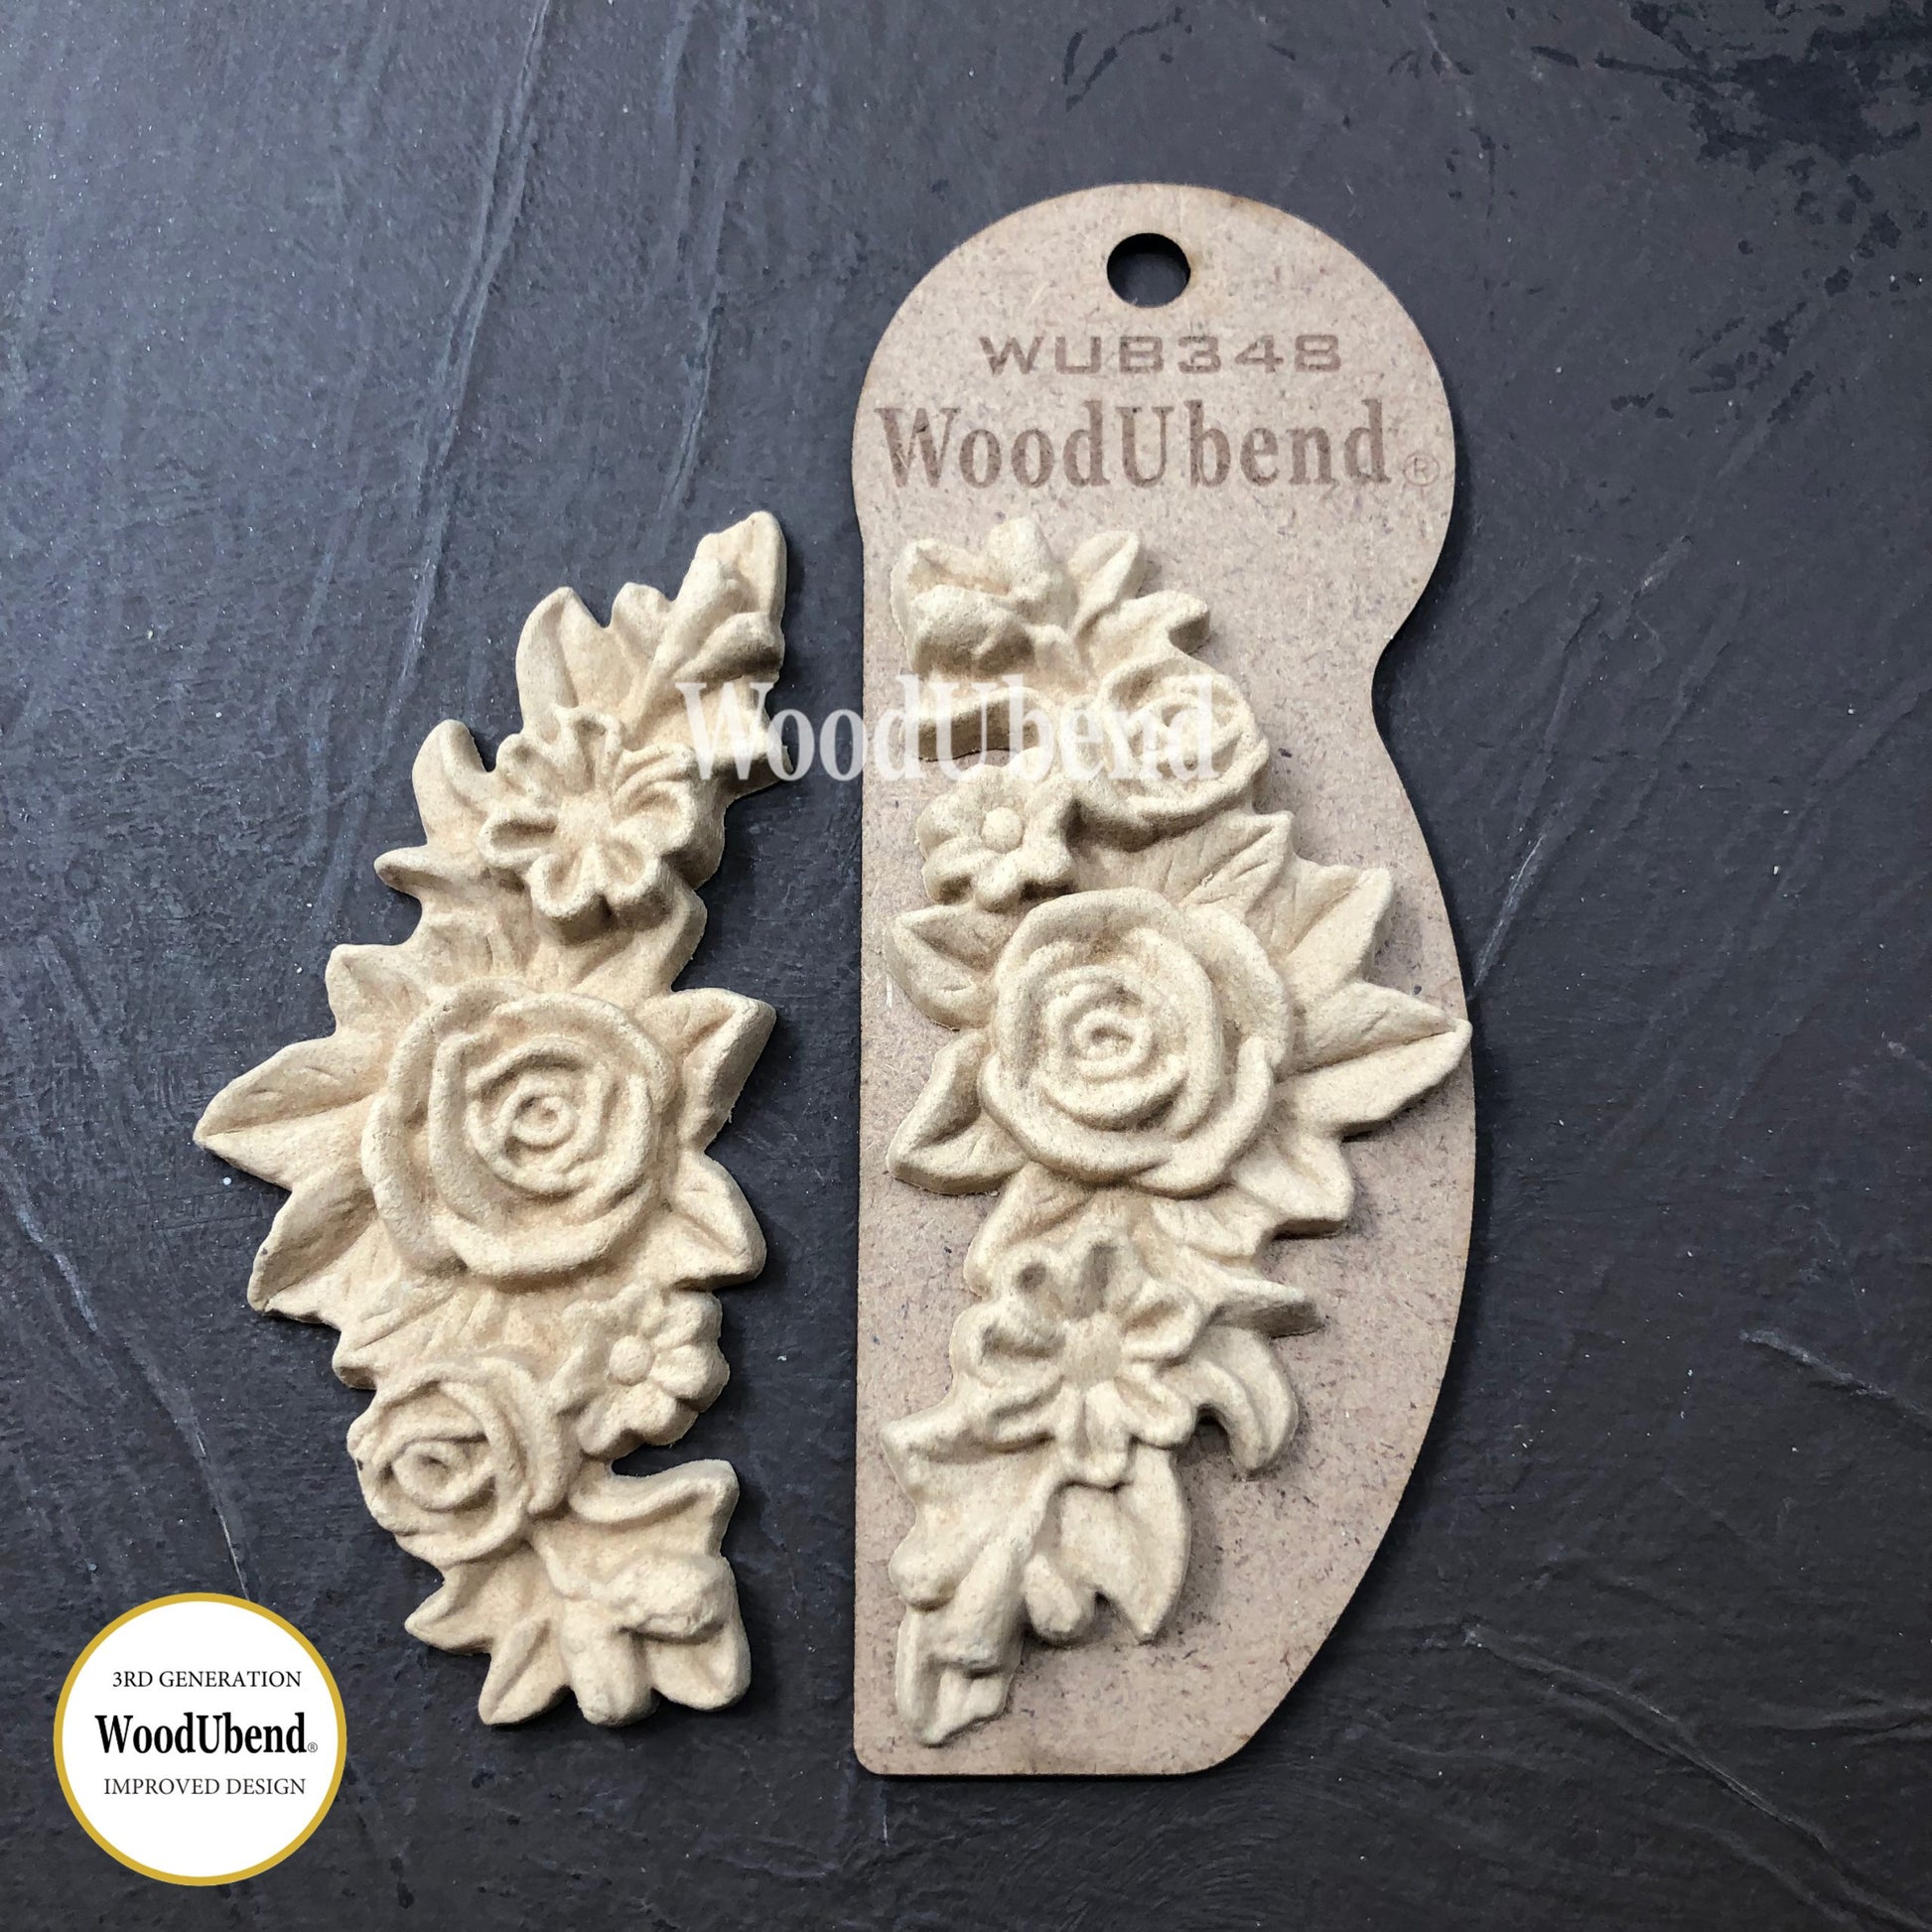 Flower Garlands  5.5×11.5cm From WoodUBend (pack of 2 or sold individually) WUB0348 - Da Vinci Chalk Paint & Rustic home decor